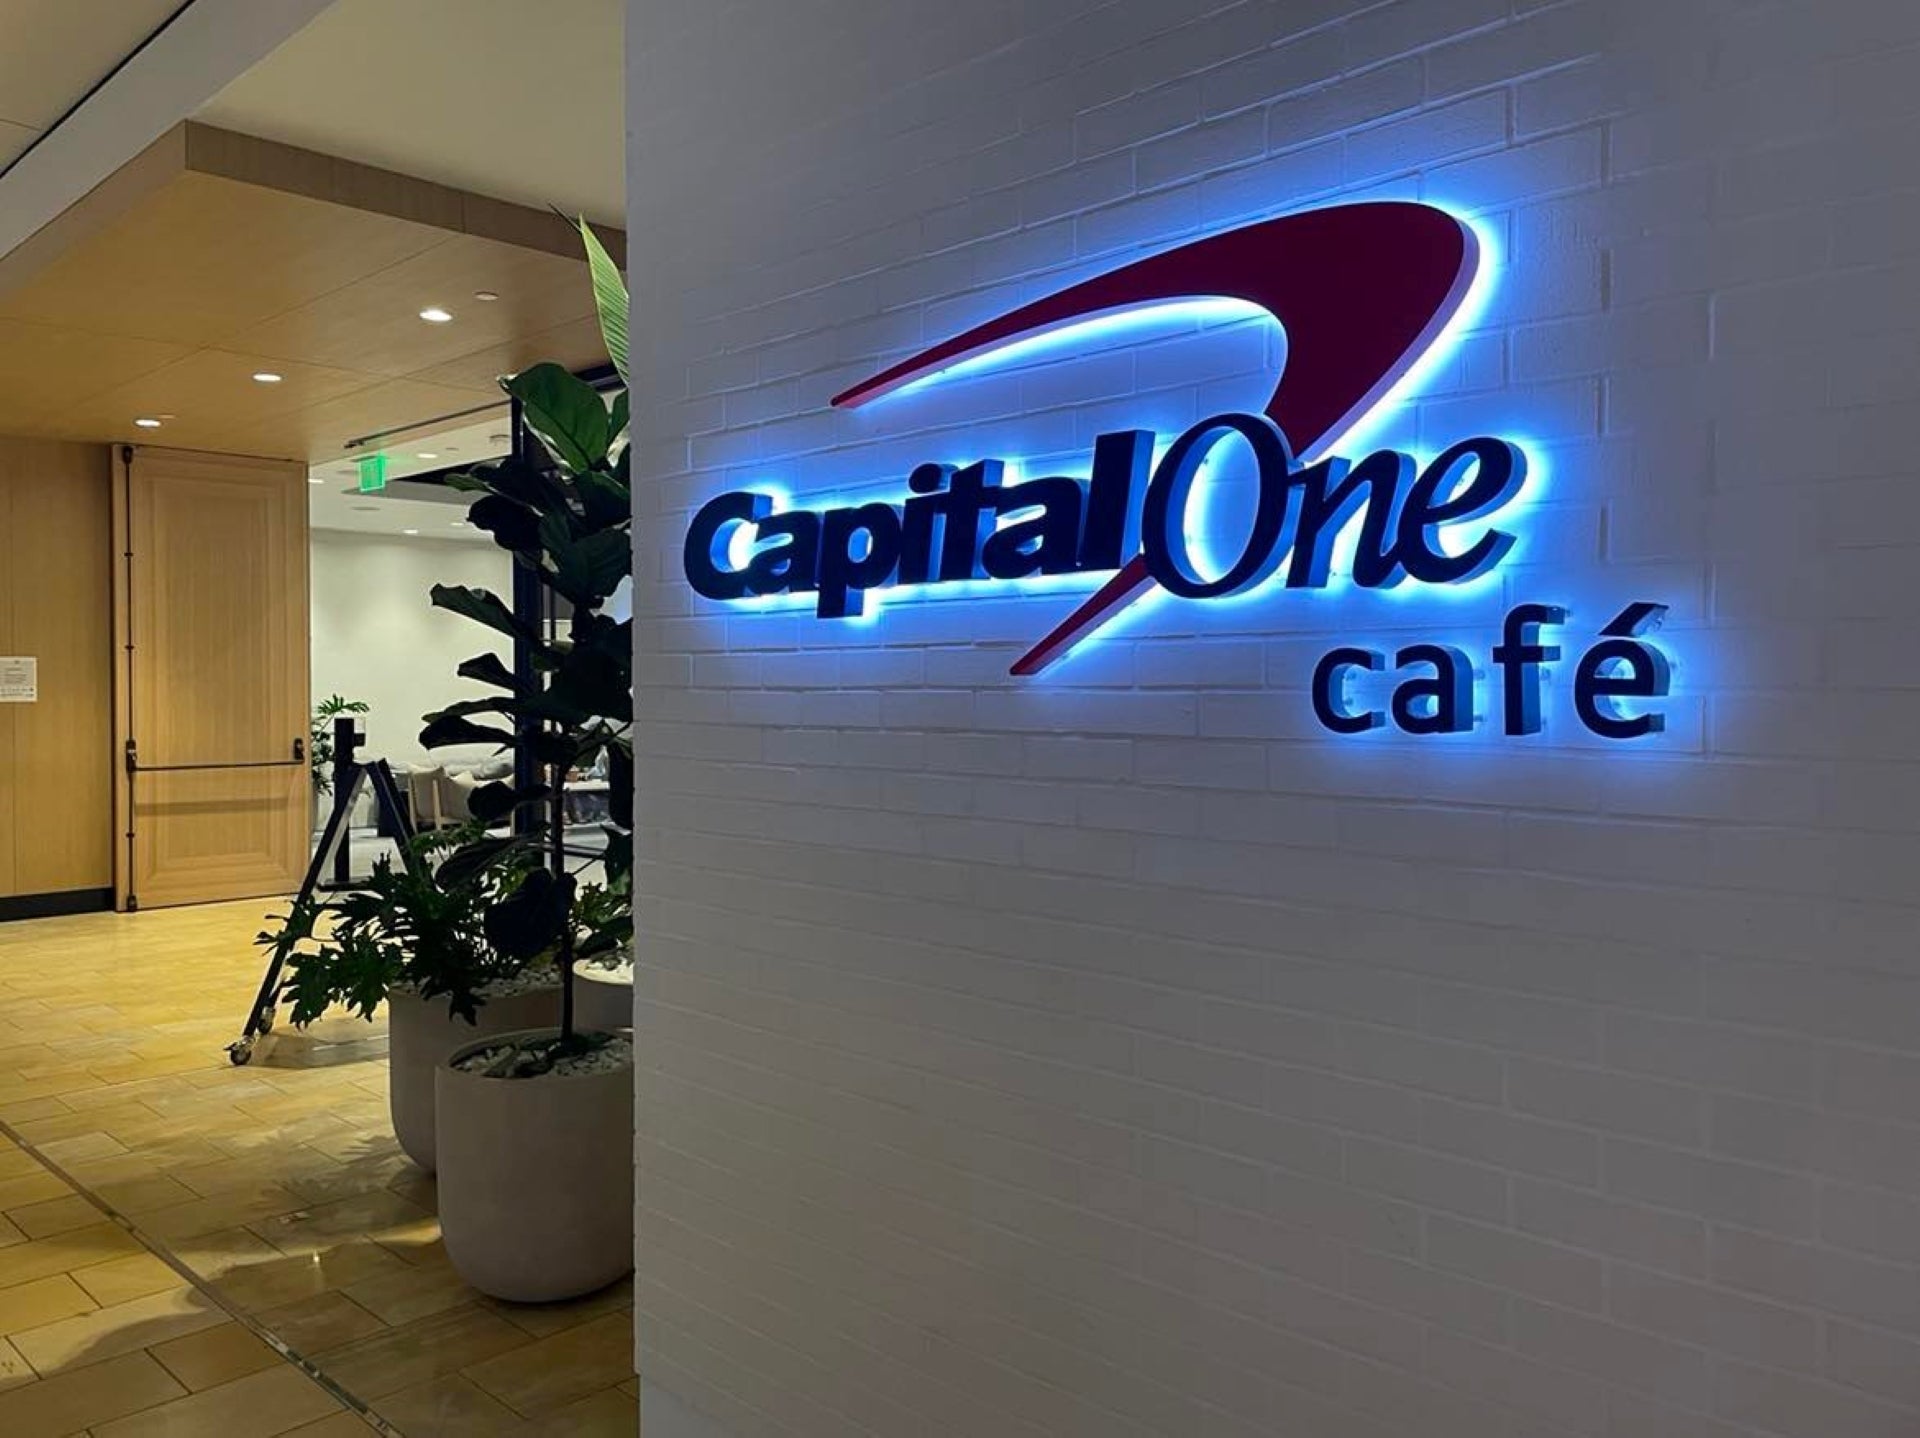 Houston Galleria Capital One Cafe entrance sign 1